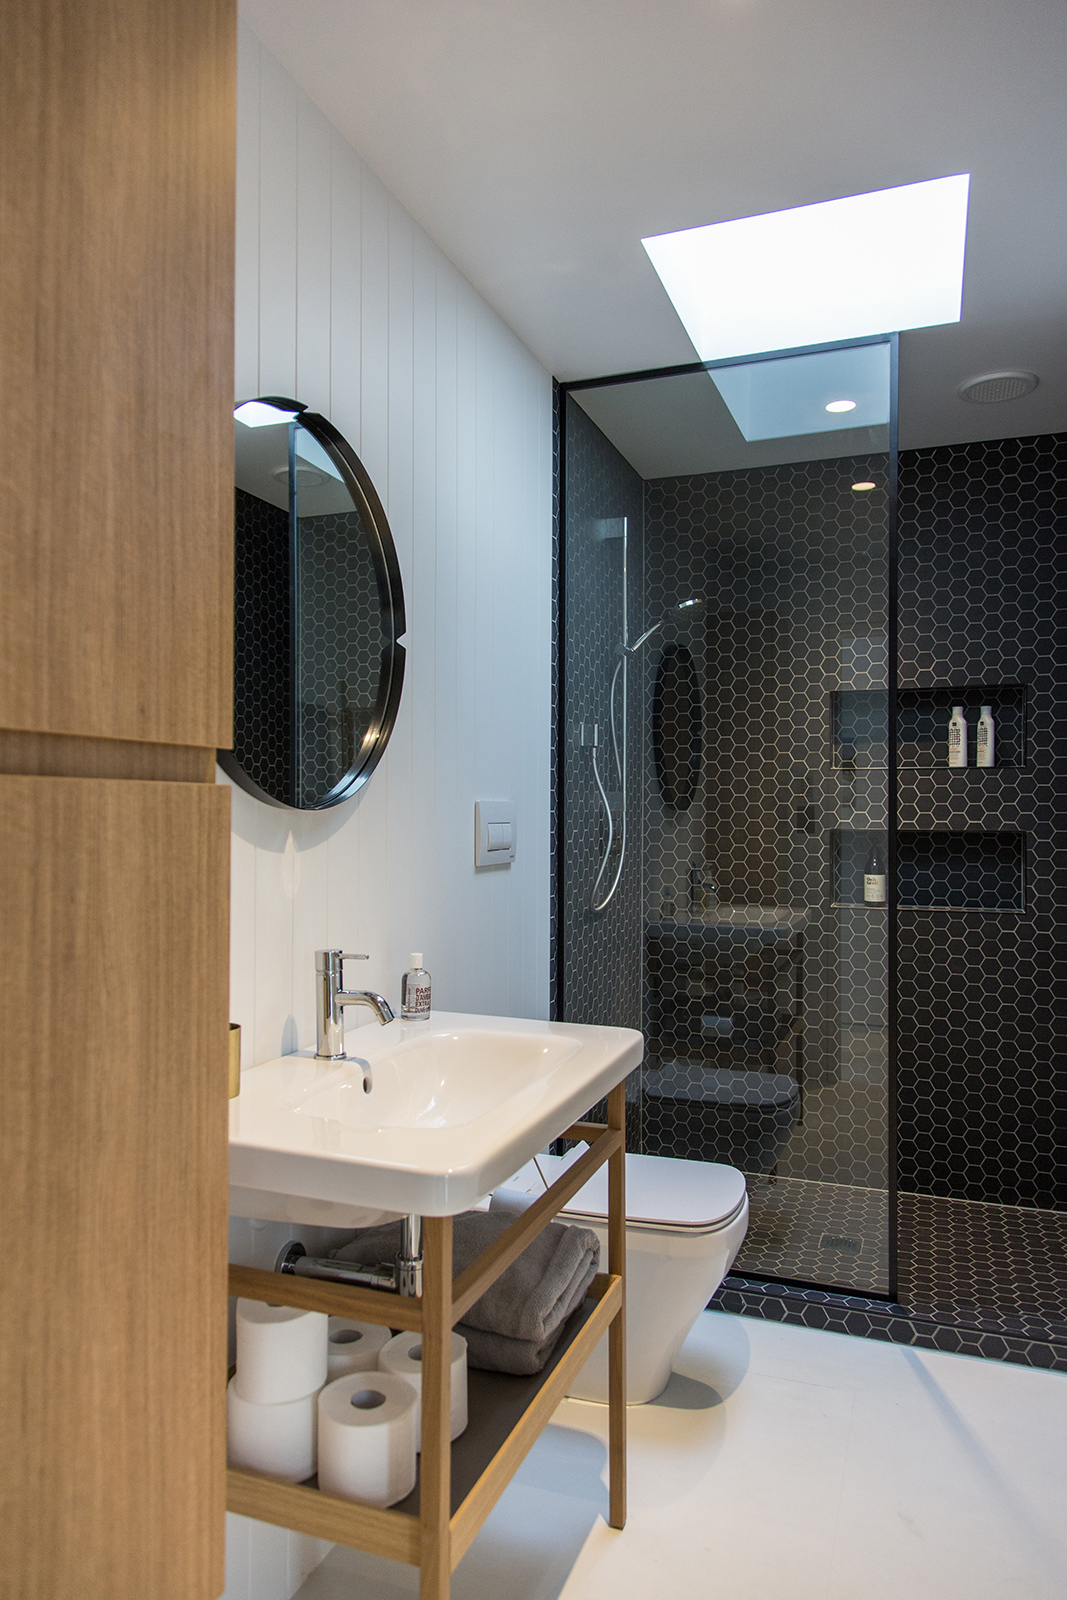 The home's compact bathroom is located in its central service core. Photograph by Jeremy Toth. 